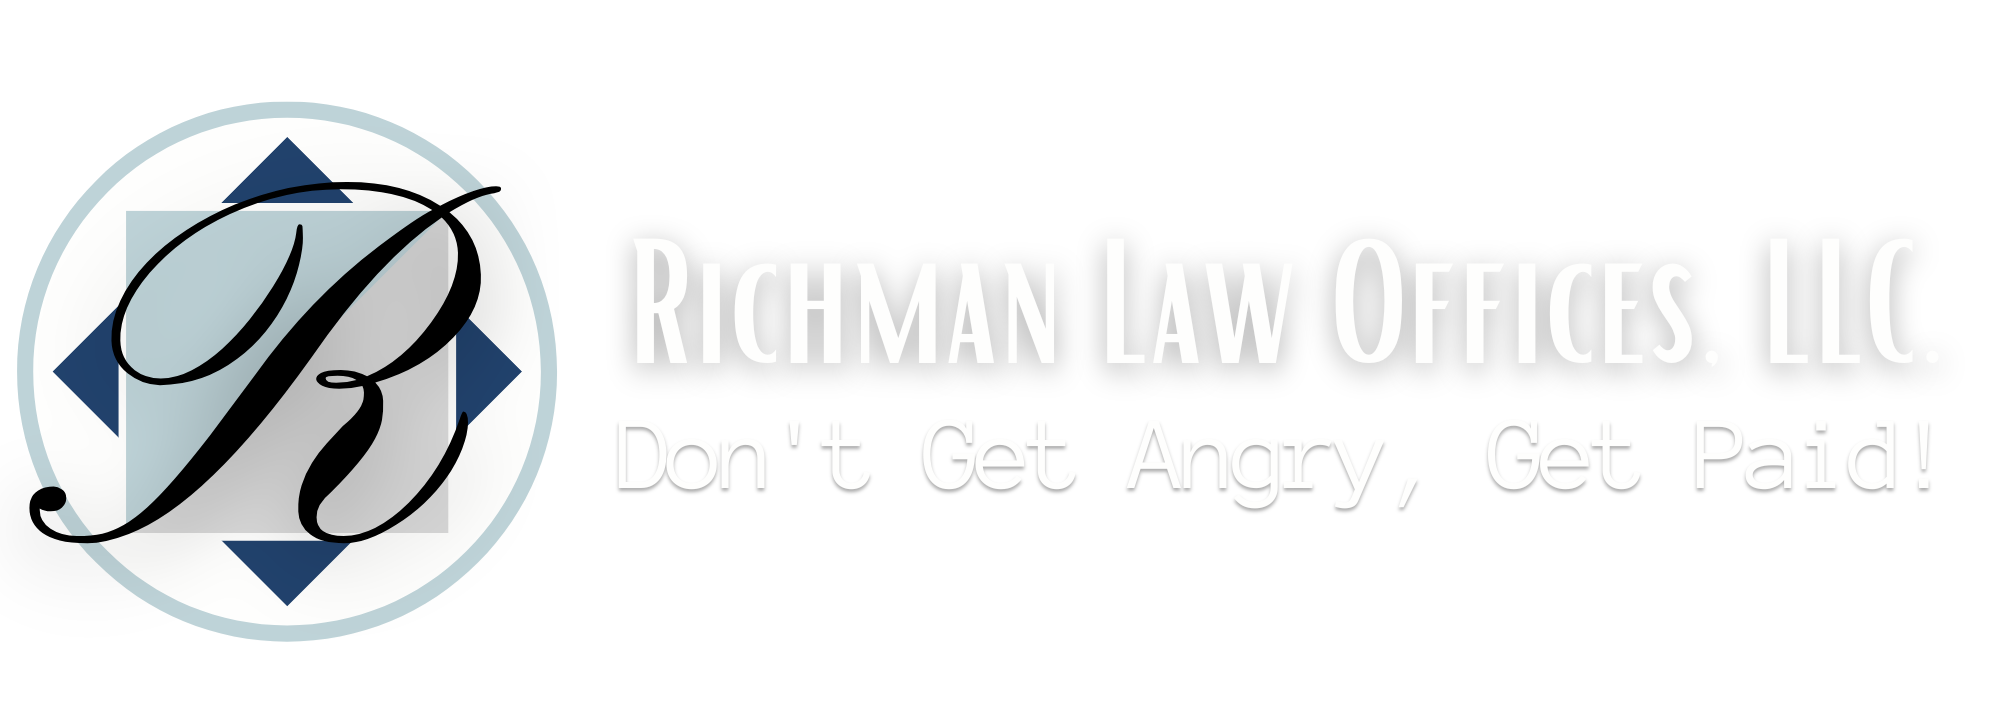 Richman Law Offices